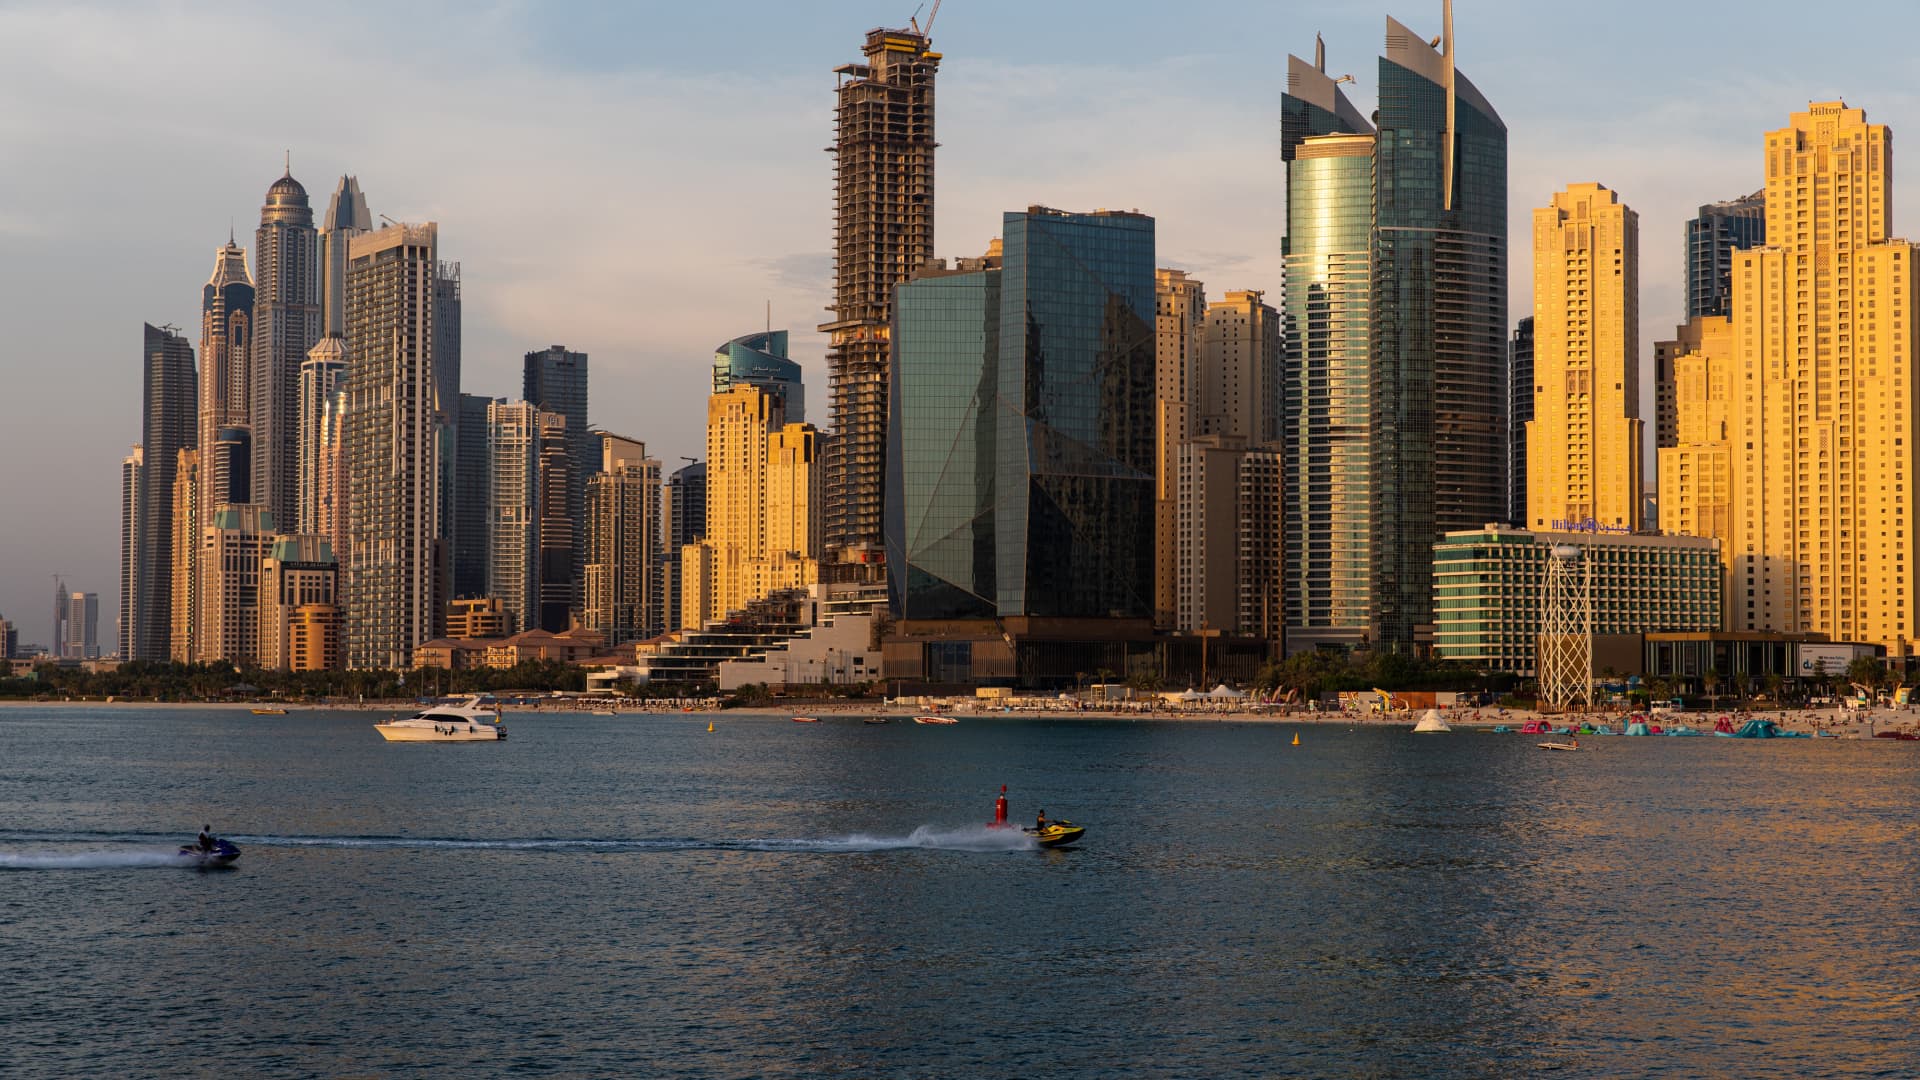 Jet skis pass by residential skyscrapers on the waterside in the Dubai Marina district in Dubai, United Arab Emirates, on Monday, June 8, 2020.